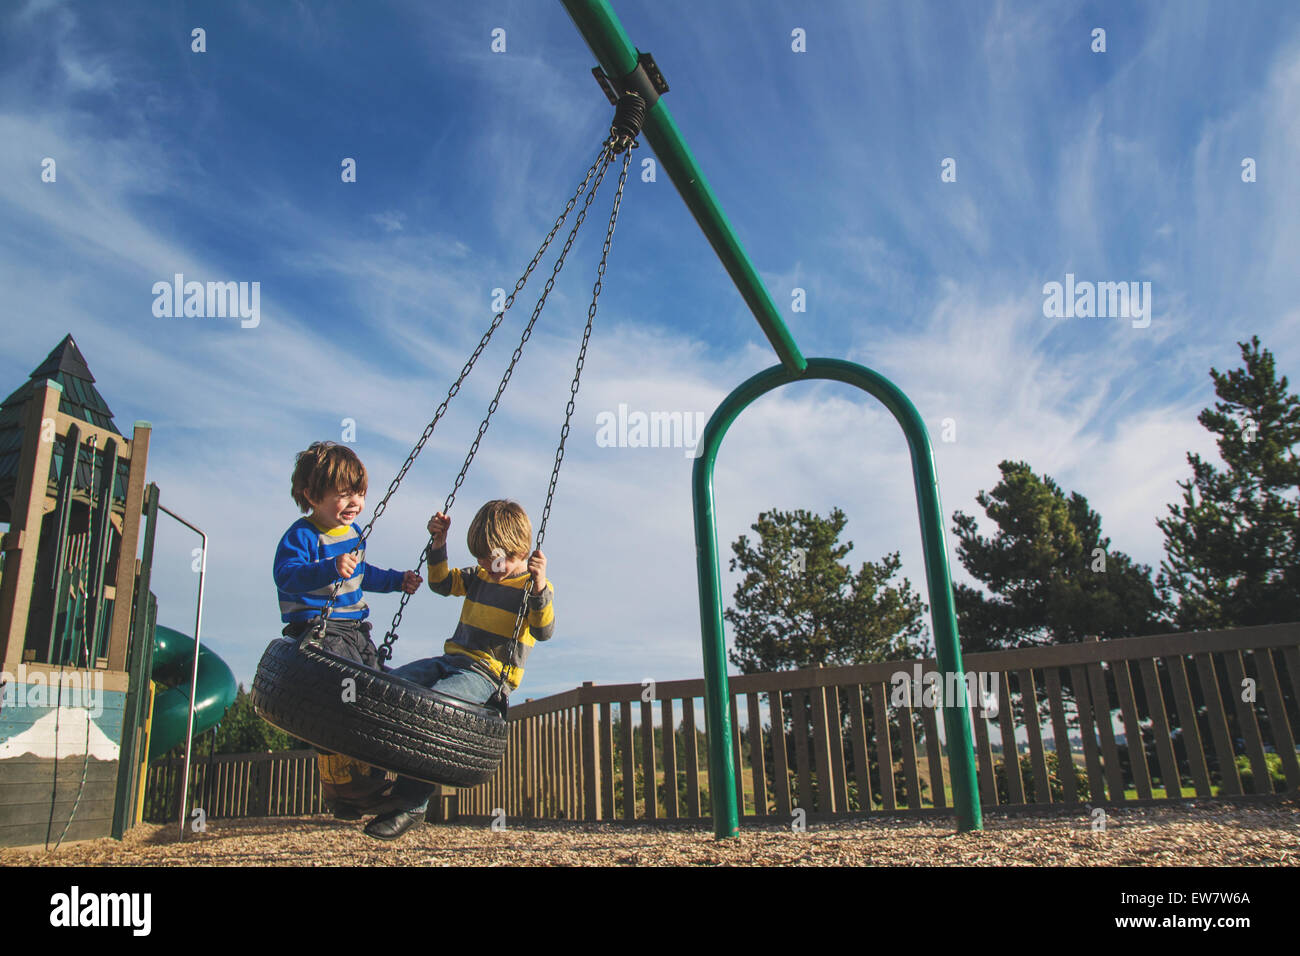 Two young boys swinging on a tire swing at a park Stock Photo